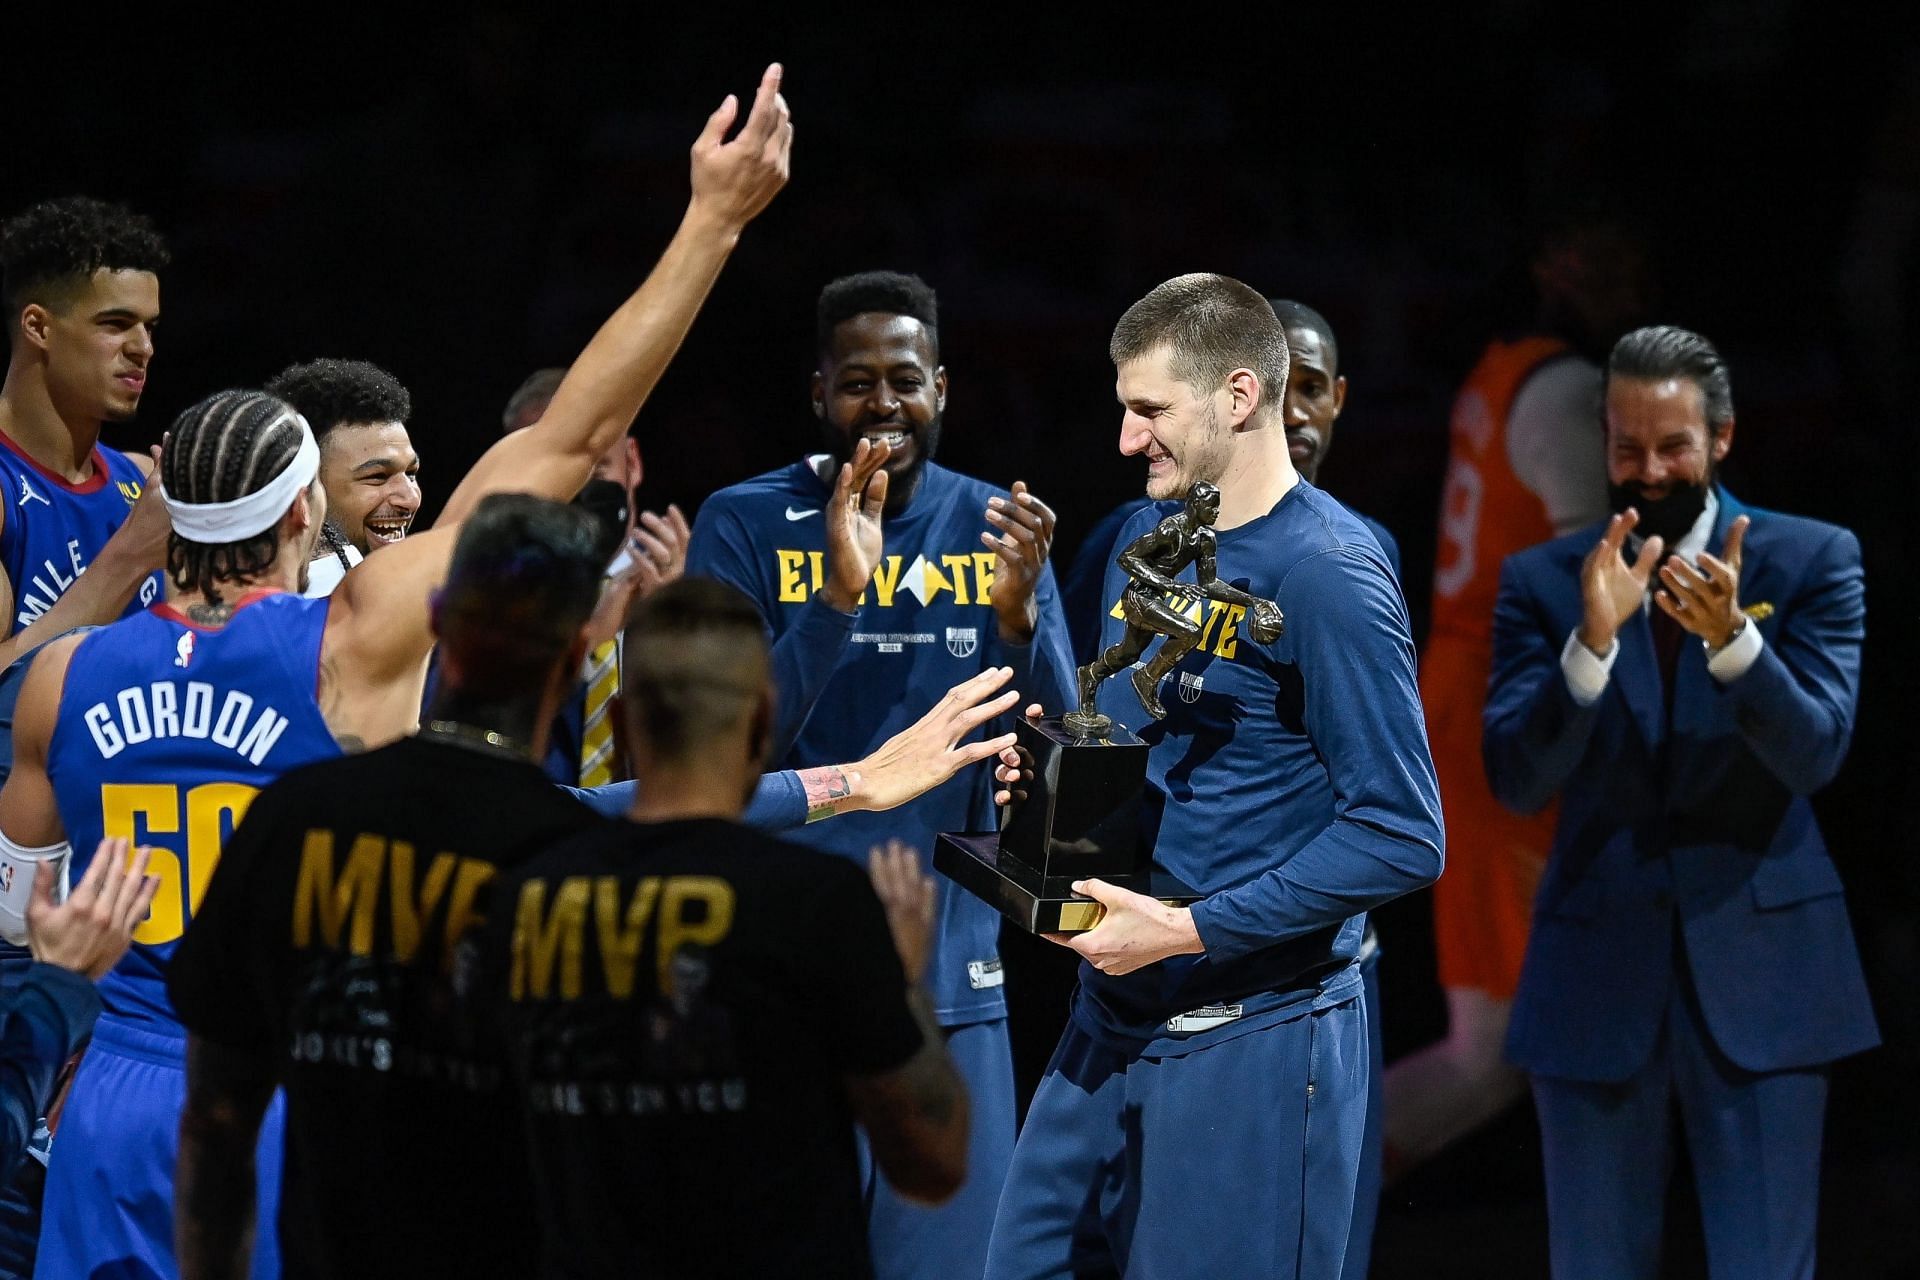 Nikola Jokic needs all the help he can get to carry the Denver Nuggets into the playoffs. [Photo: Nugg Love]